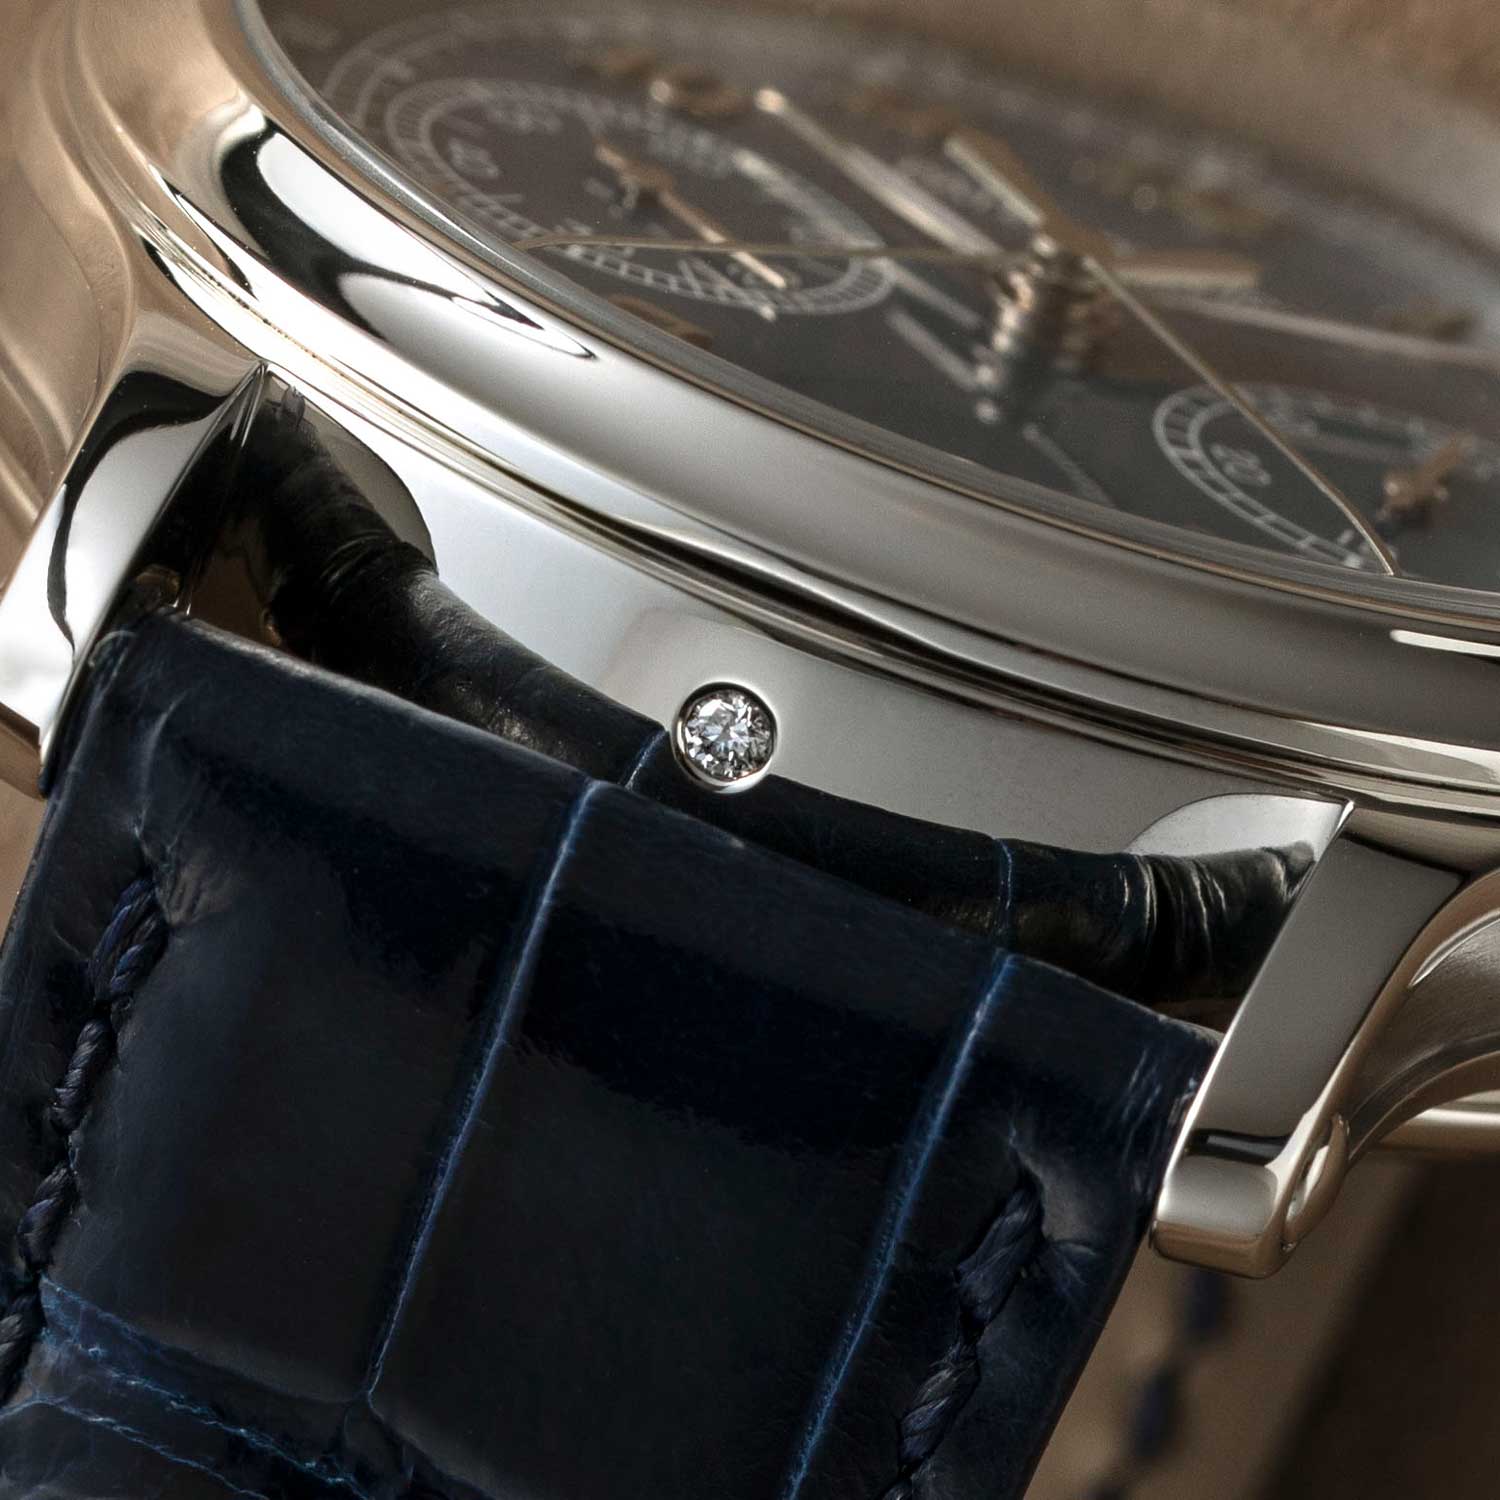 It is Patek Philippe's convention to identify their platinum cases by placing a small diamond on the side of the case, just under the 6 o'clock hour marker; seen here on the case of the 5370P-011 (©Revolution)